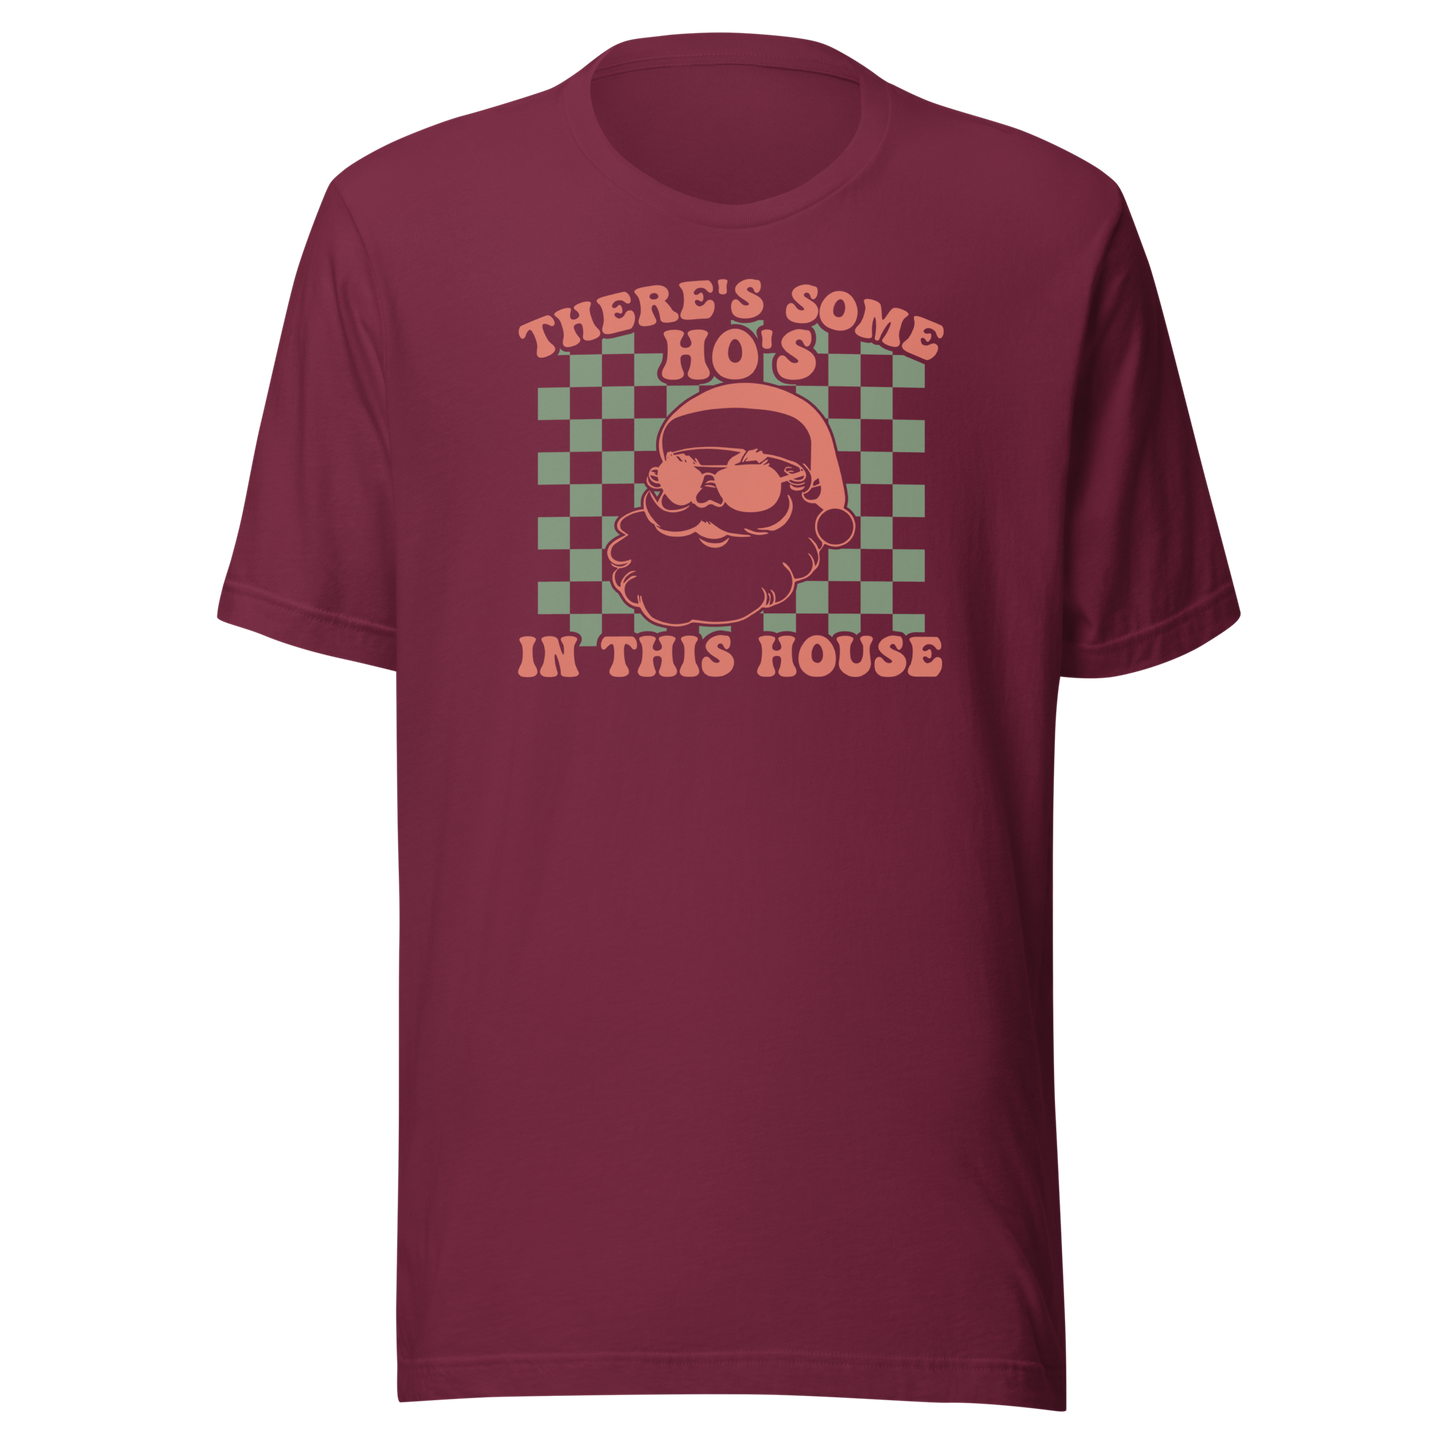 There's Some Ho's in This House T-Shirt